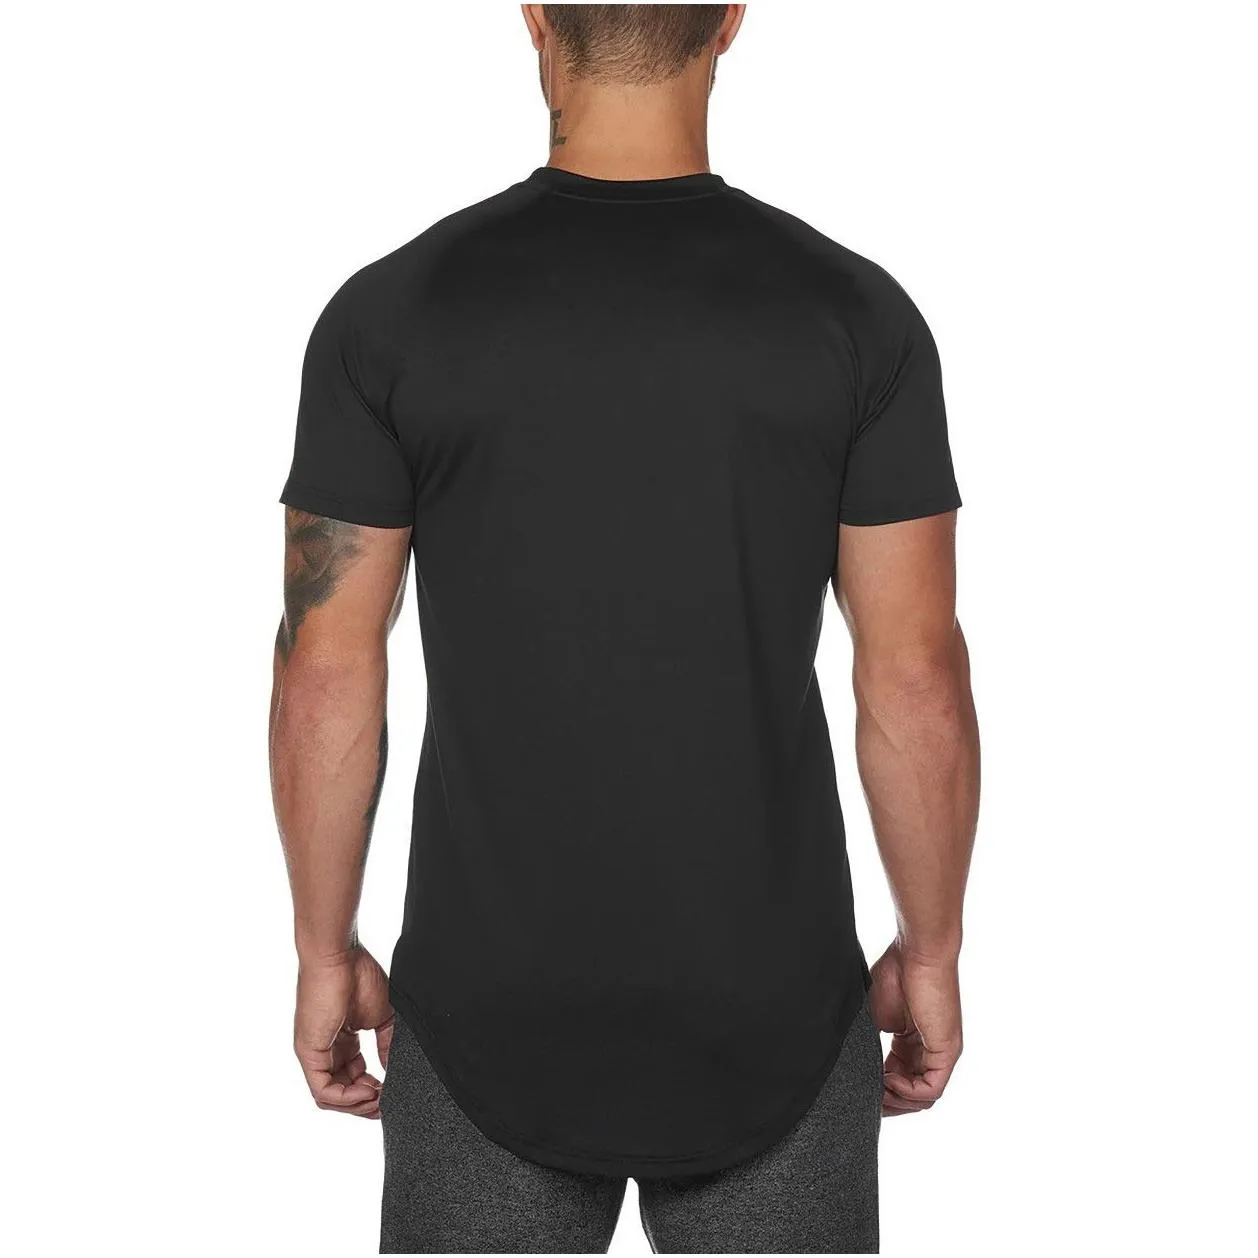 Men`S T-Shirts Lemens Mens Sports T-Shirt Europe And The United States Fitness Training Quick-Drying Elastic Loose Breathable Short-Sl Otonj